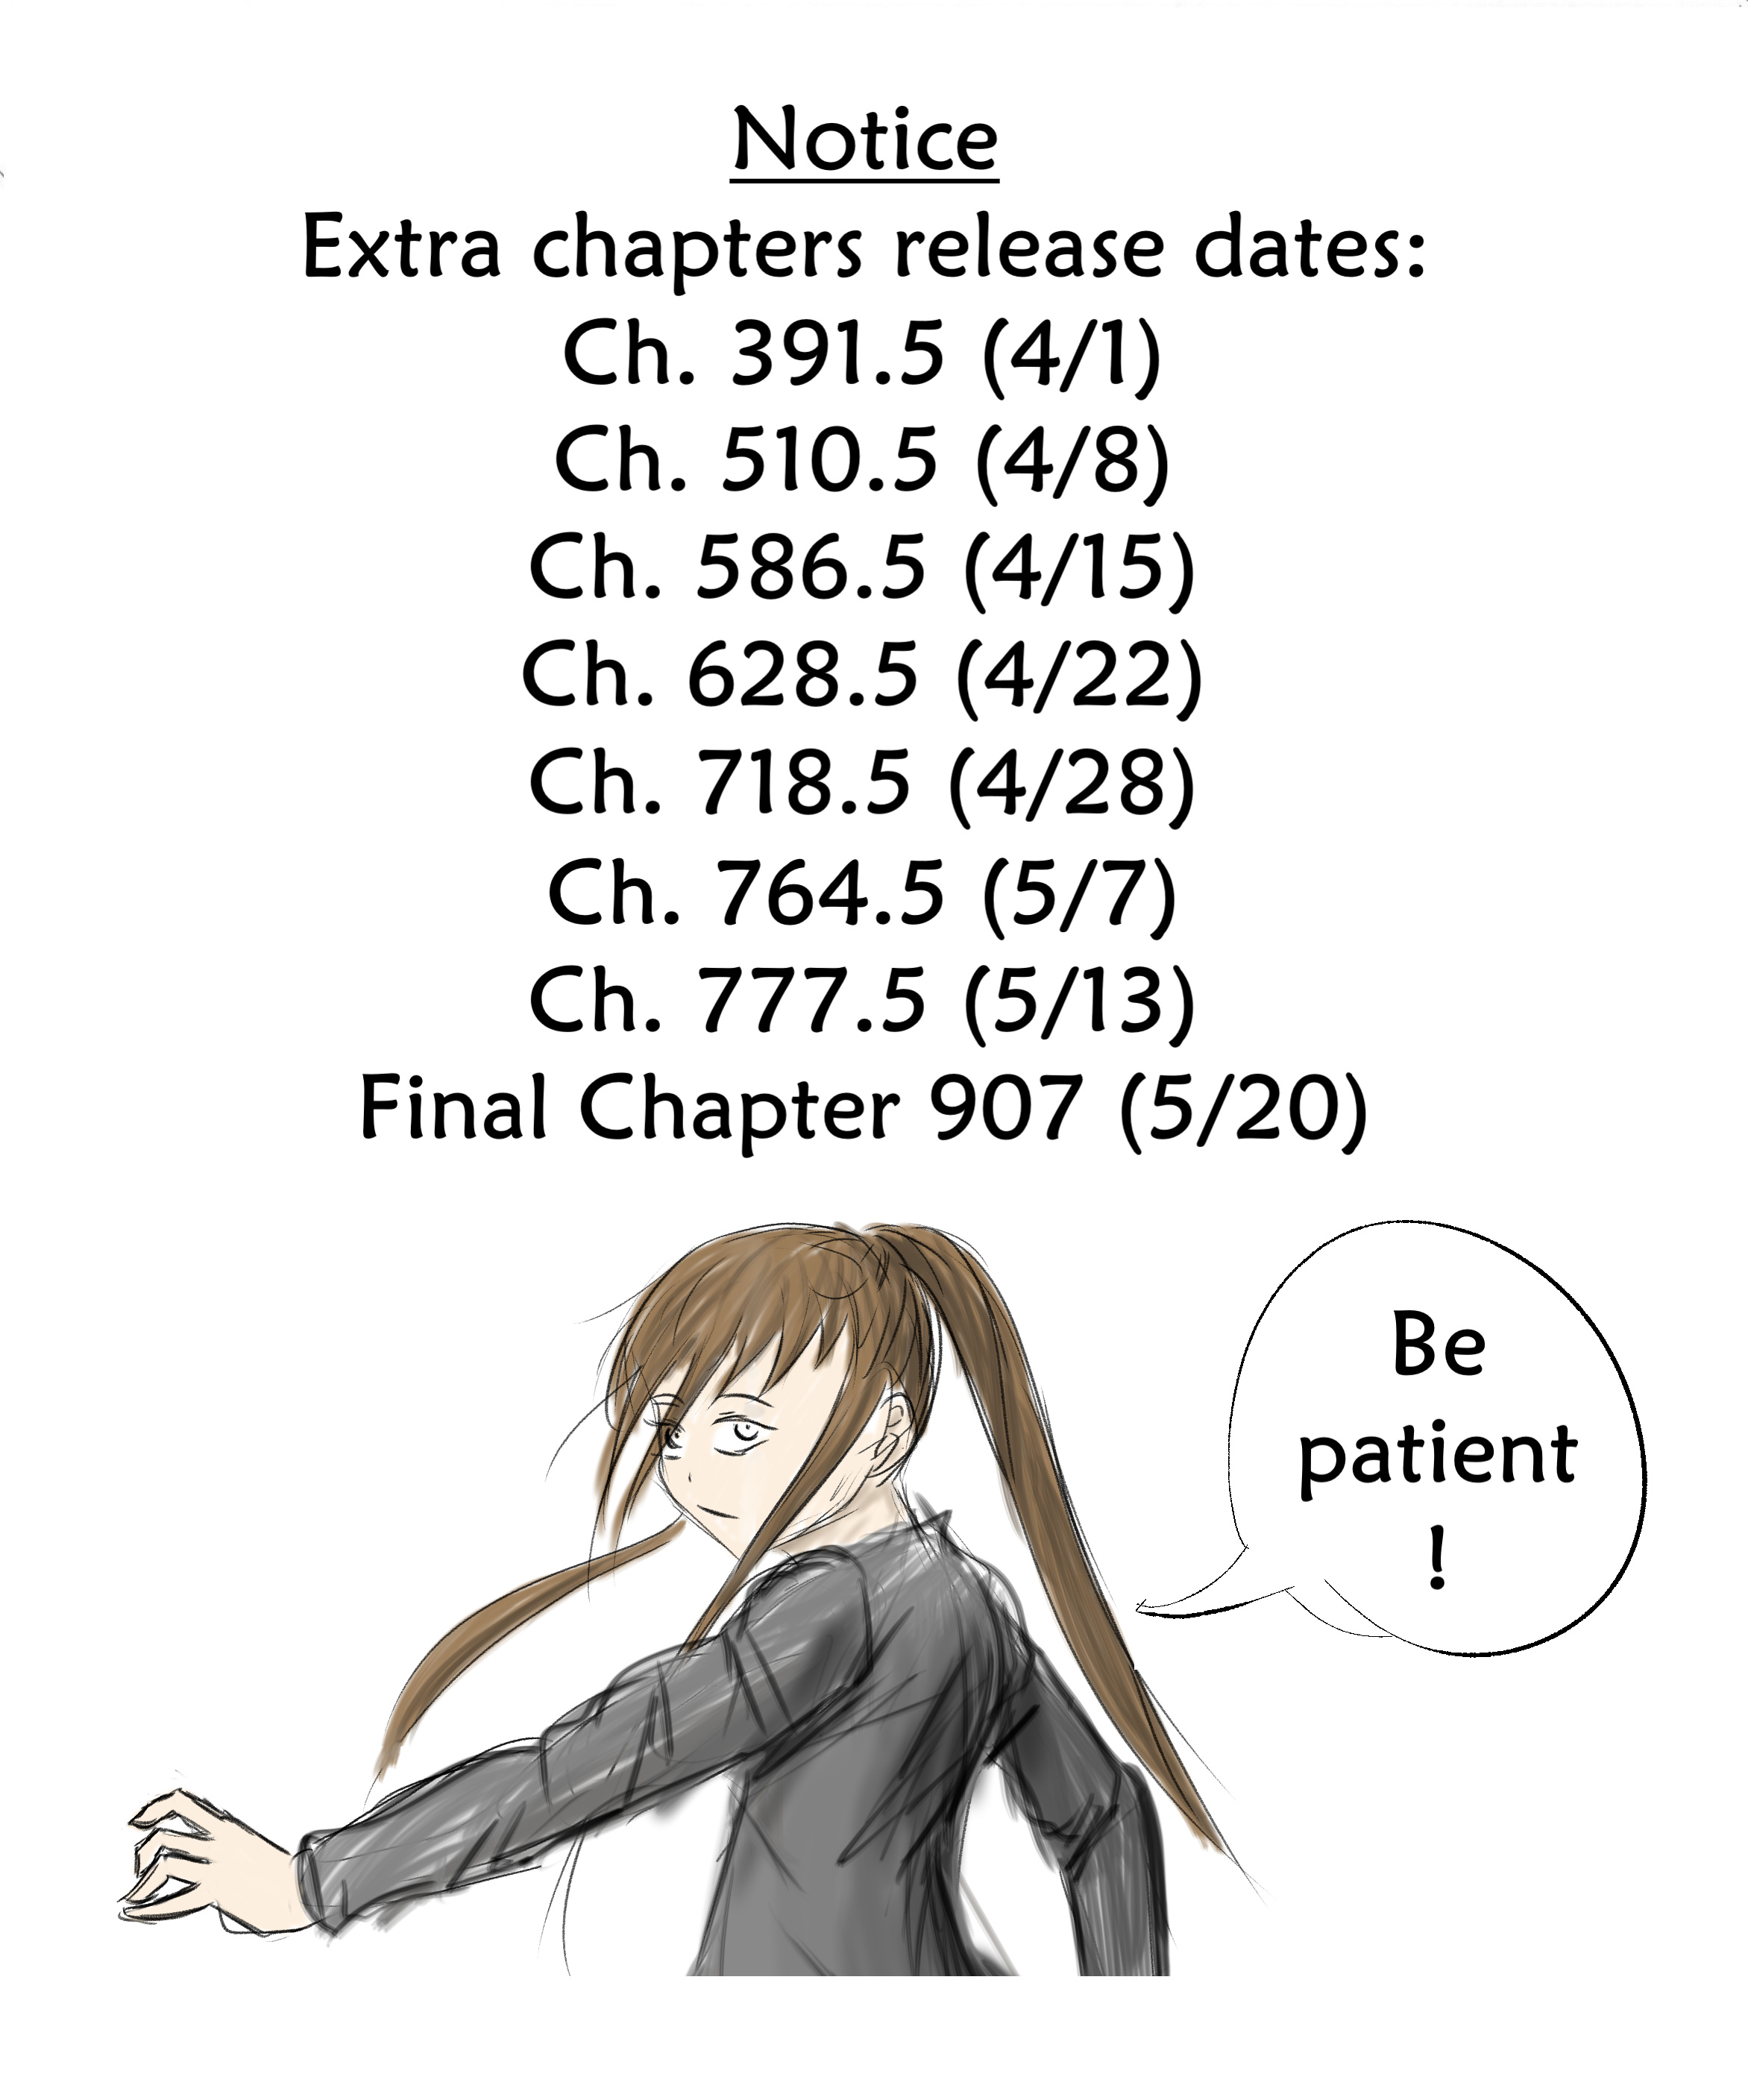 Sound Asleep: Forgotten Memories Vol.8 Chapter 906.1: Chapter Release Dates - Picture 1